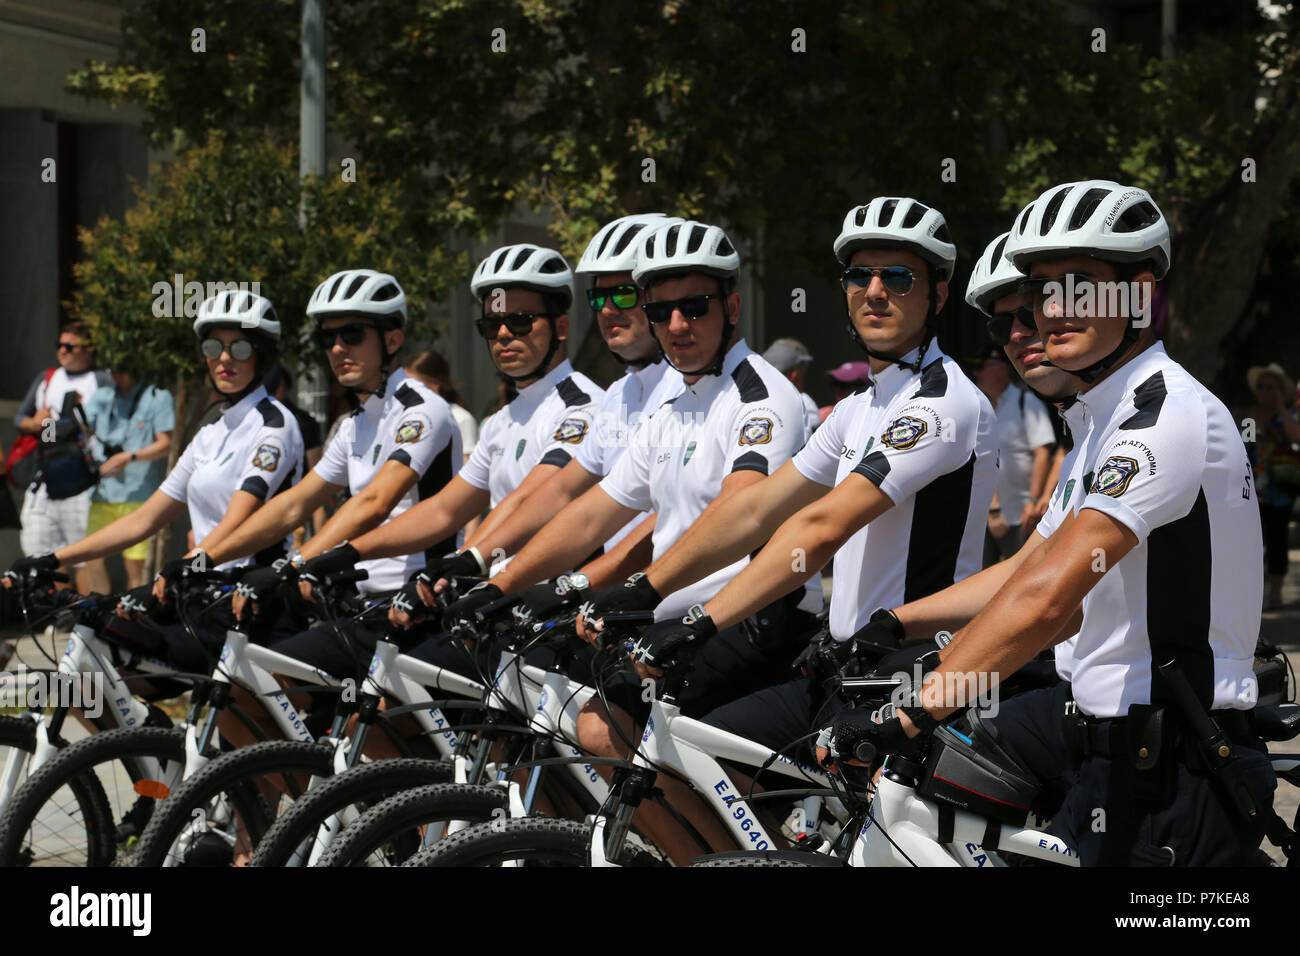 Athens, Greece. 6th July, 2018. A Greek bicycle police team pose for a  photo near the Acropolis, in Athens, Greece, on July 6, 2018. Created in  2015, bicycle police belong to the